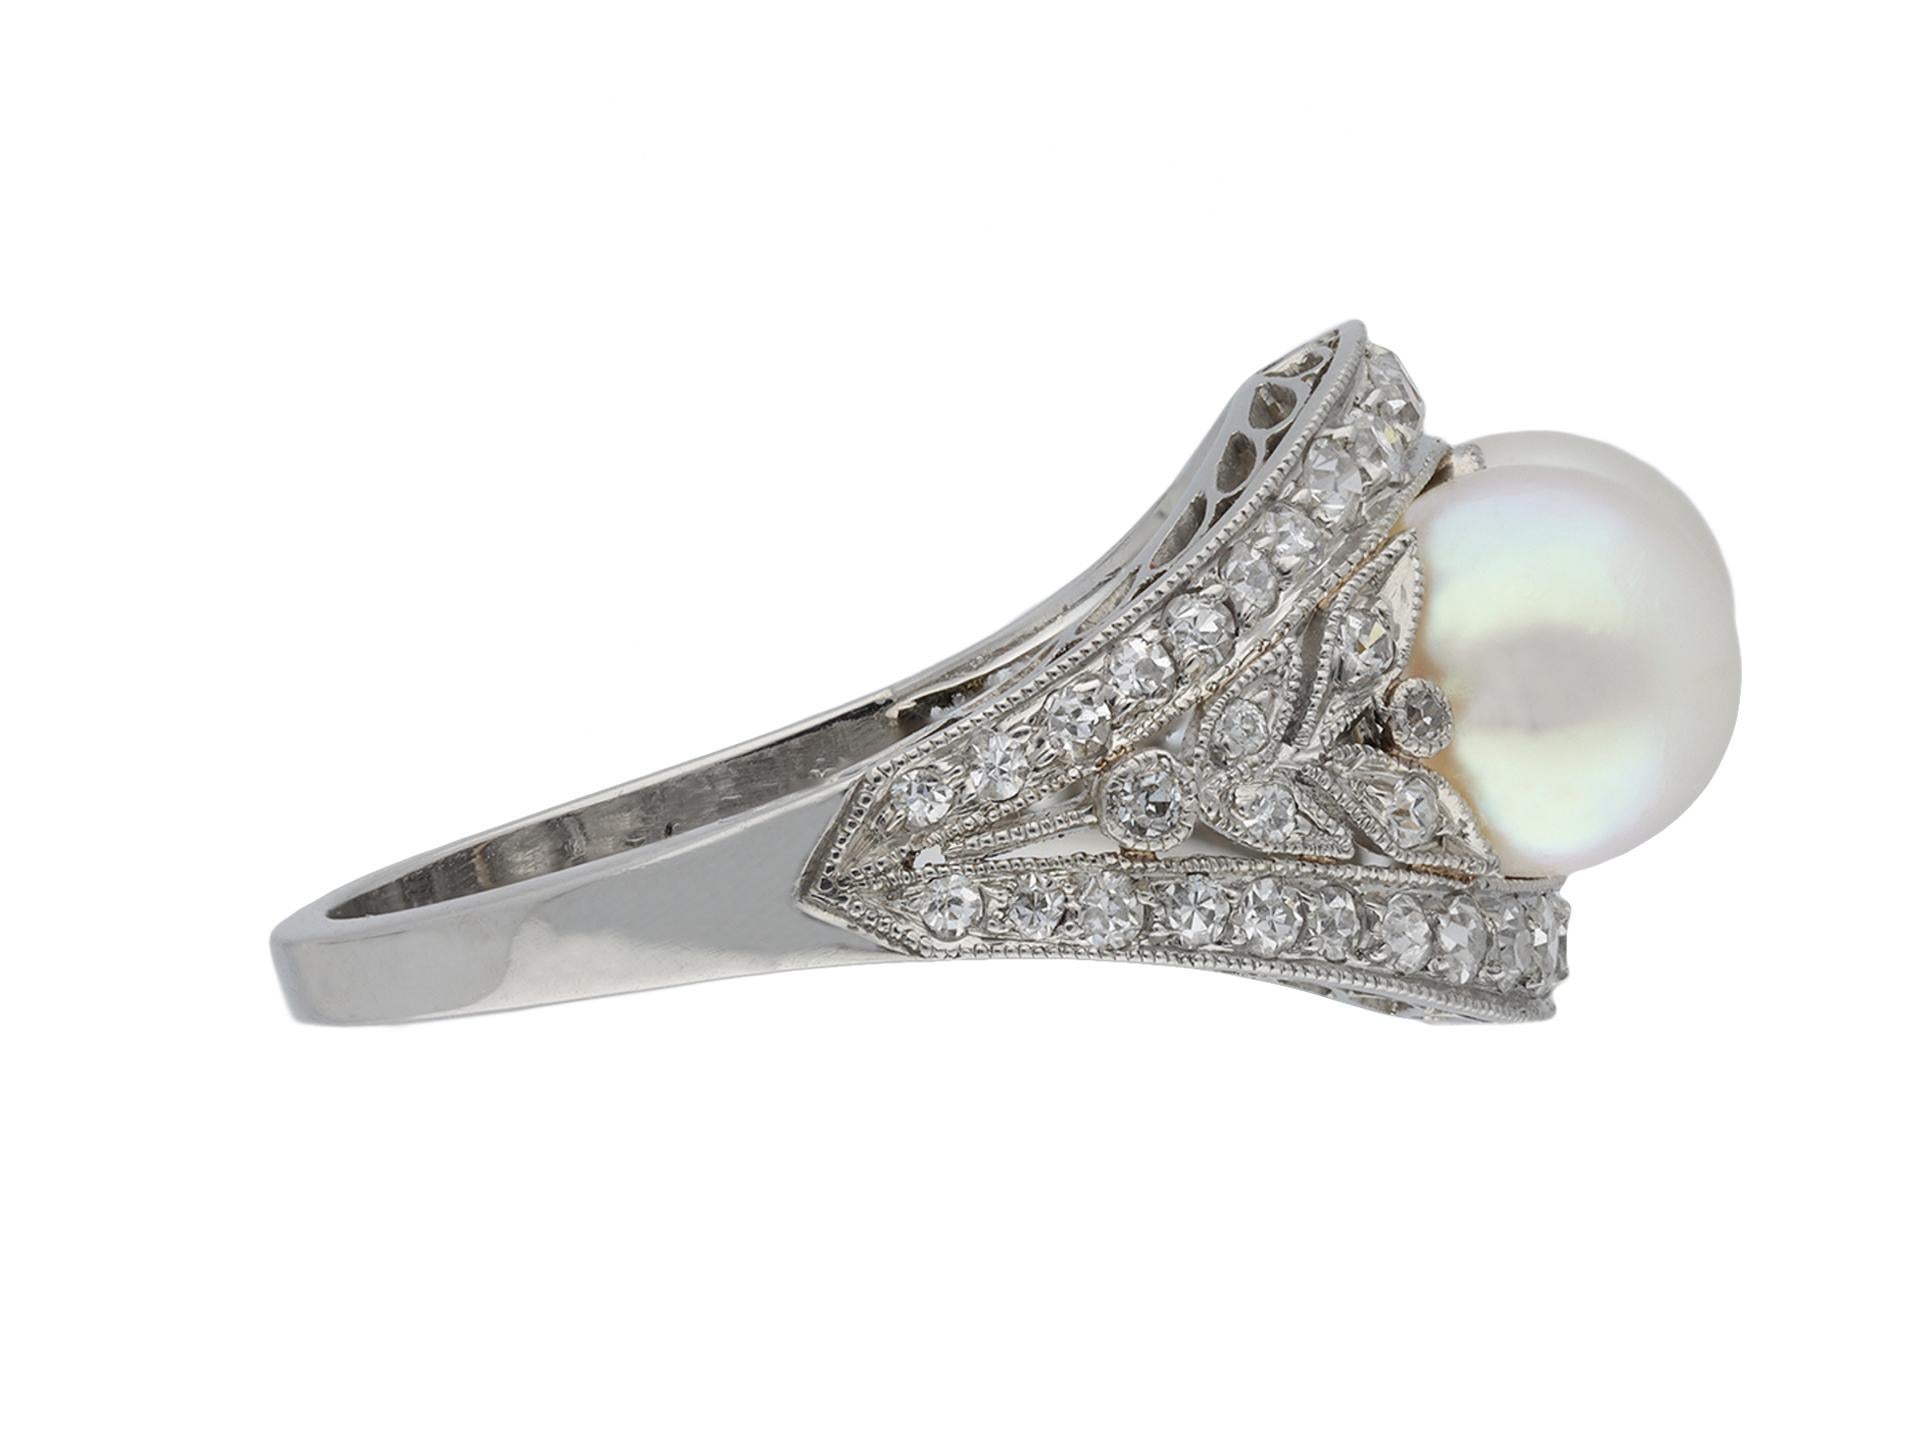 J.E. Caldwell antique natural pearl and diamond two stone ring. Centrally set with a pair of round natural saltwater pearls, approximately 6.6 - 6.7mm, in a closed back half drilled setting, further adorned with fifty six round single cut diamonds